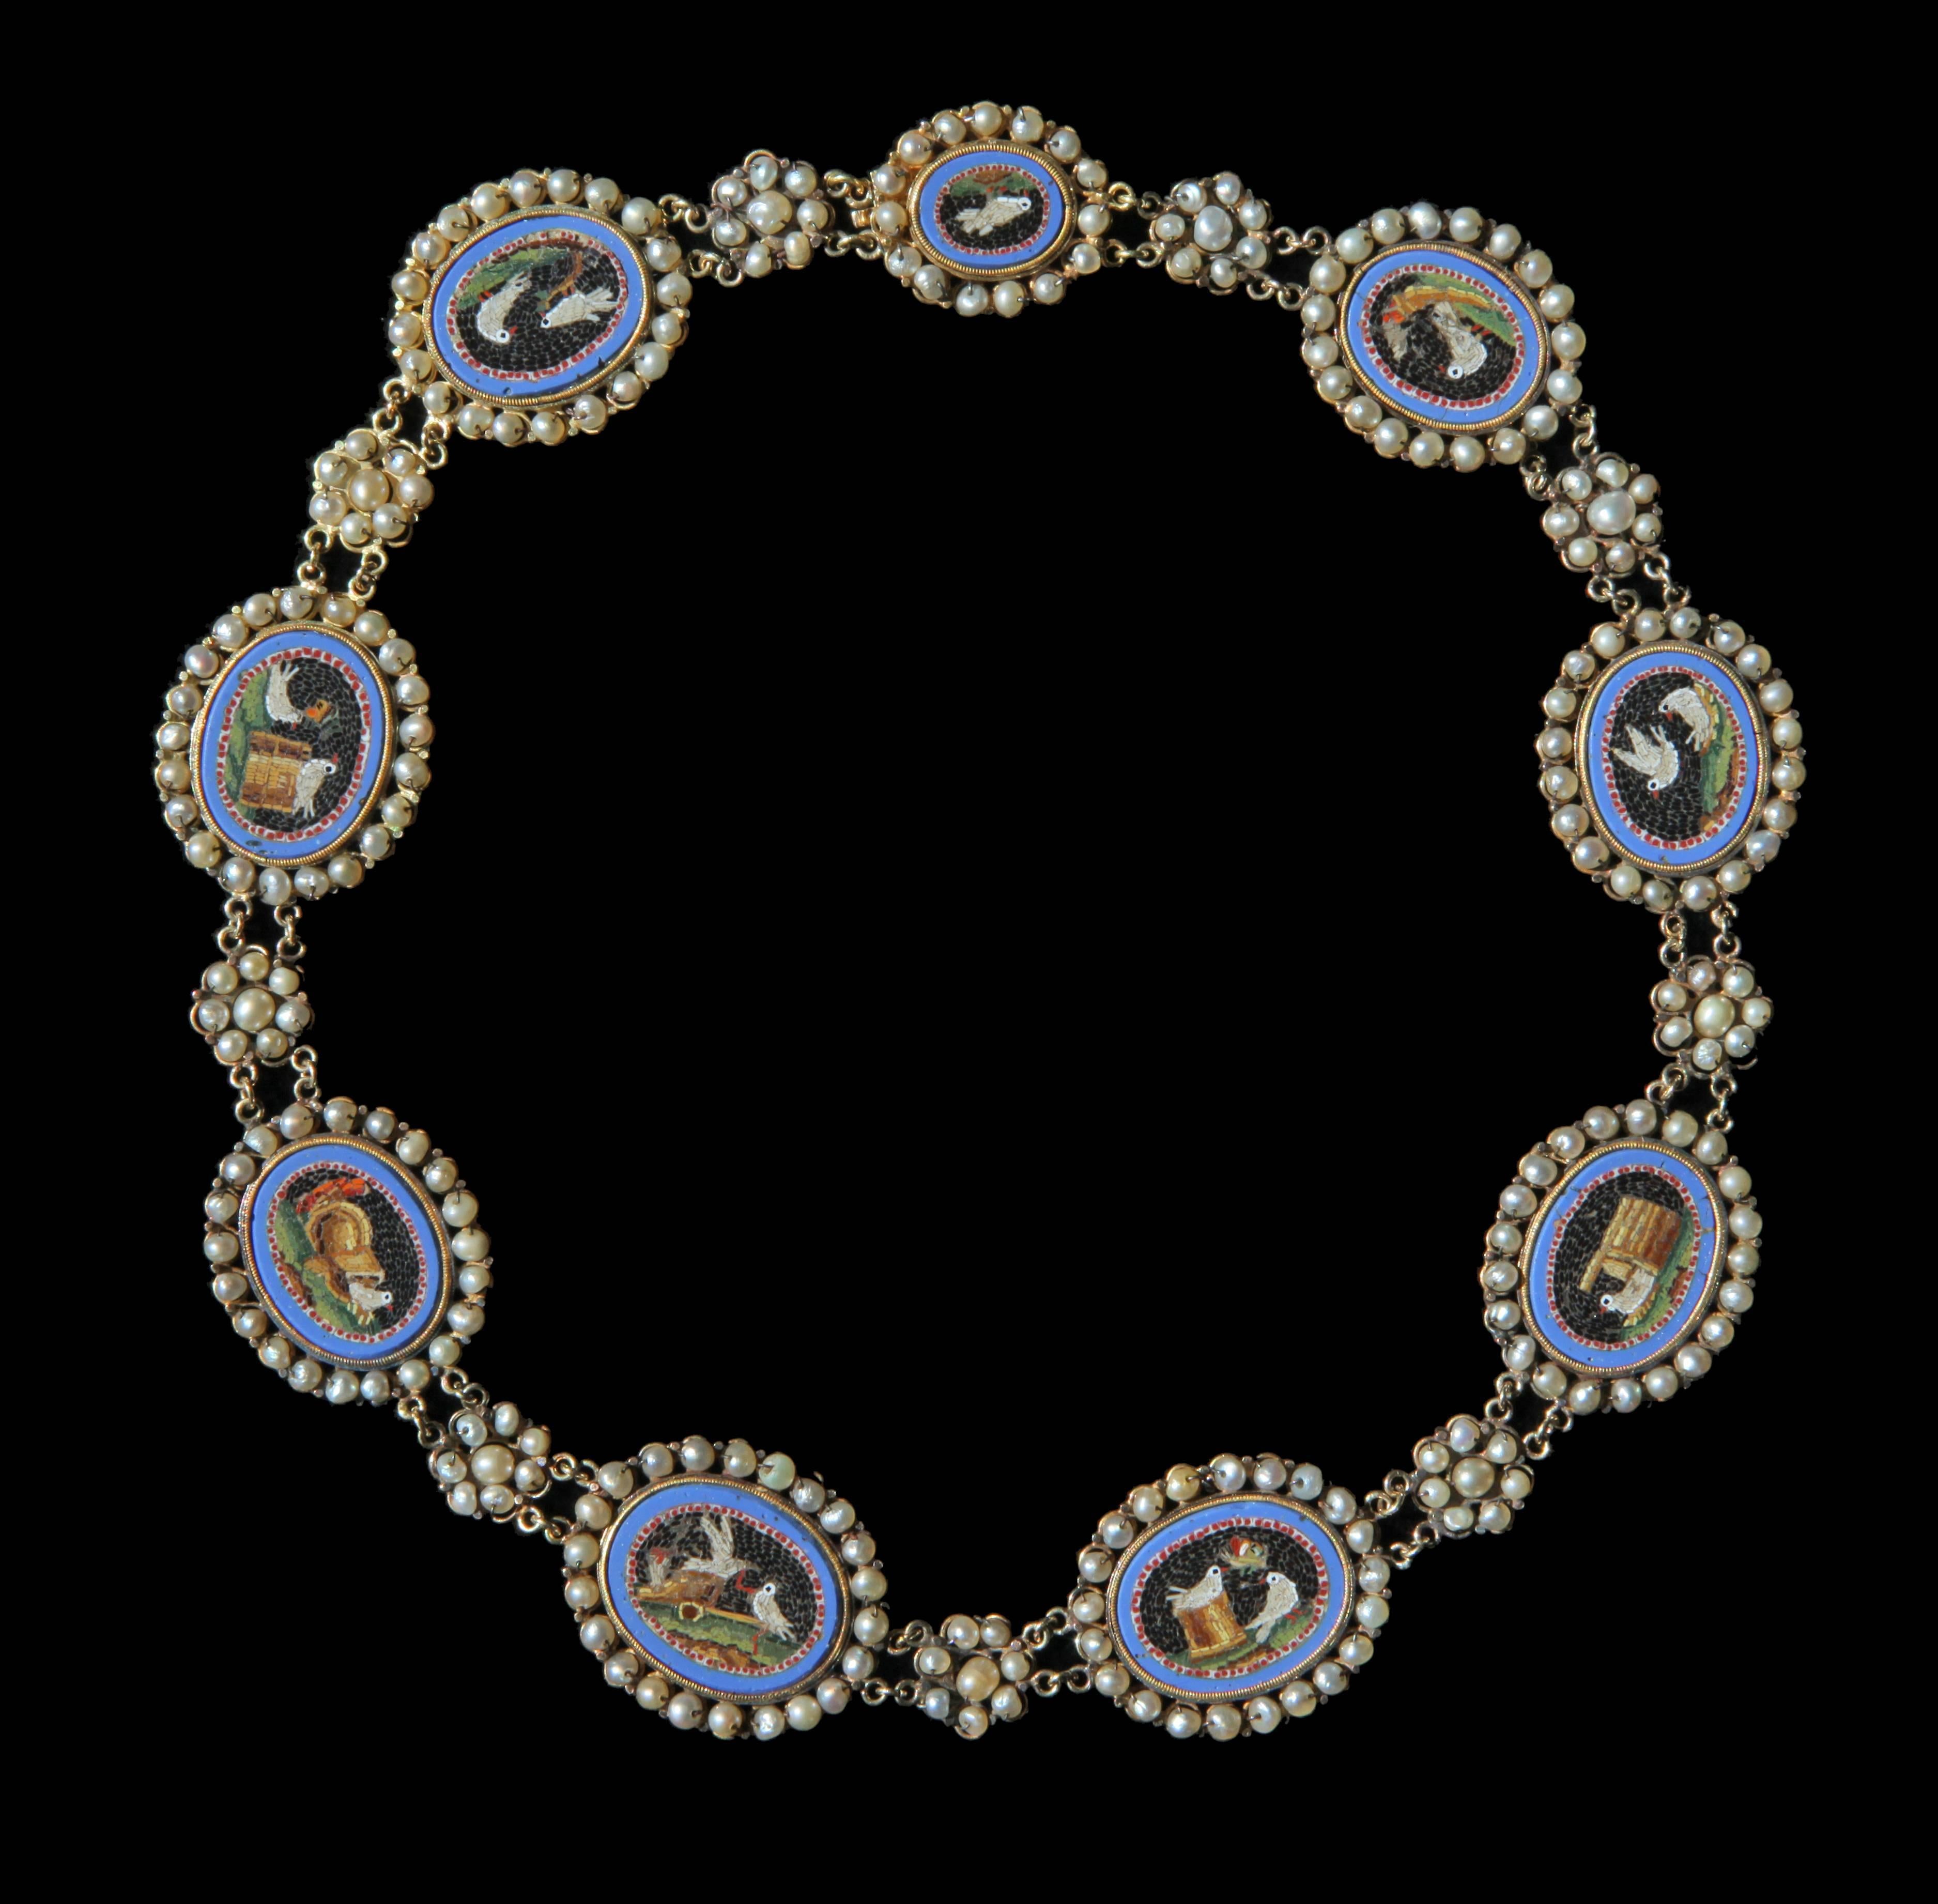 An exceptional Grand Tour antique necklace composed of 9 oval Roman style micro-mosaics, depicting Doves in the manner of the famous mosaics discovered in Emperor Hadrian's villa at Tivoli & described by Plinny in the 1st Century AD.
Mounted in